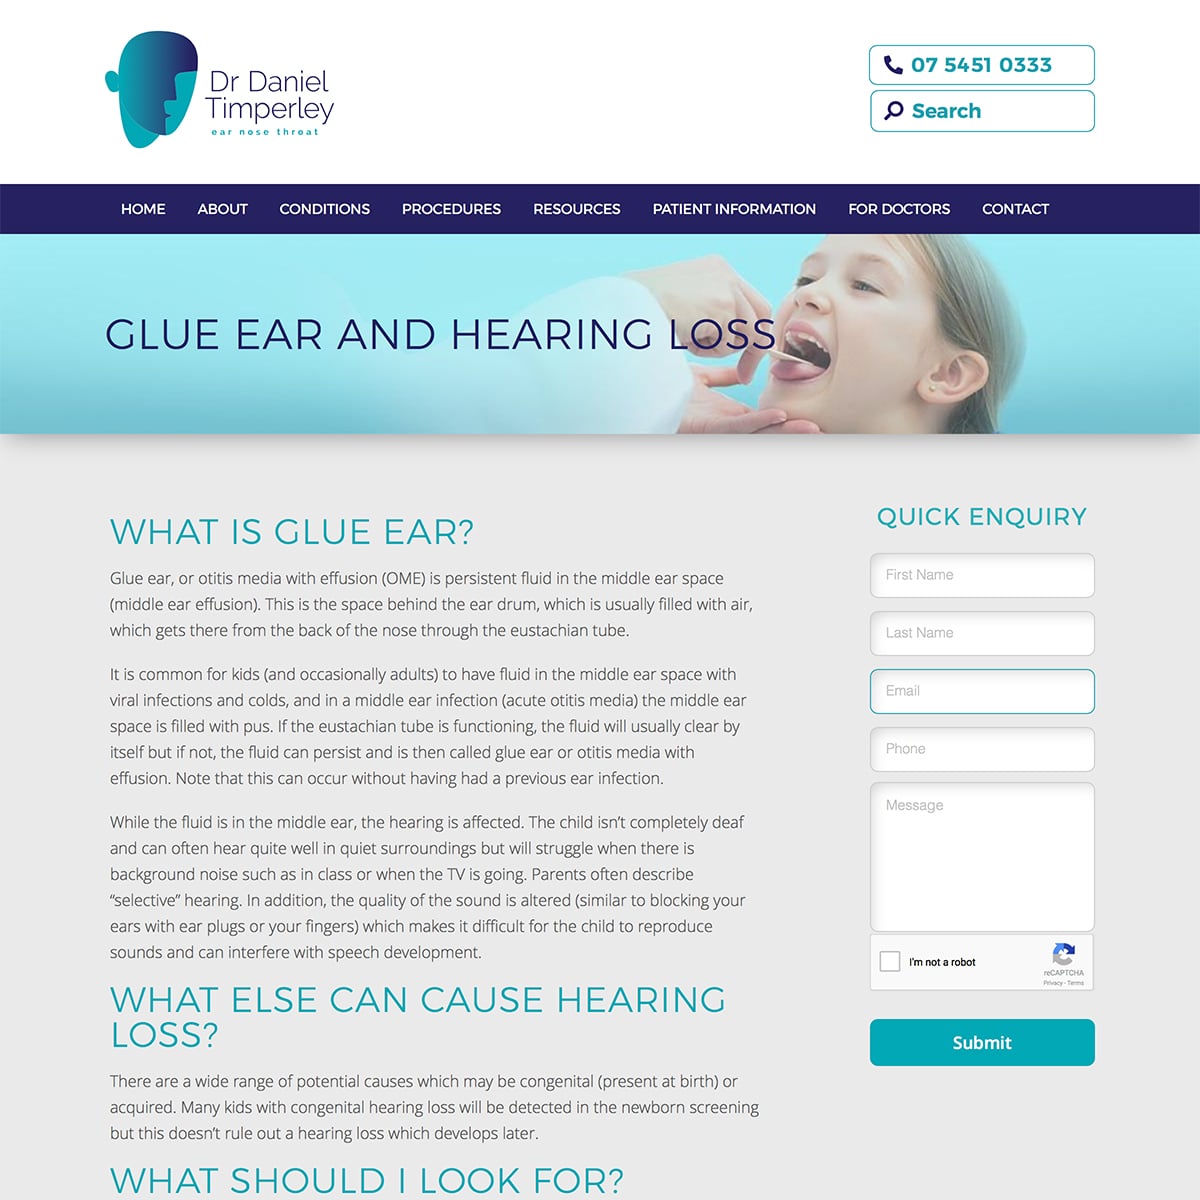 Dr Daniel Timperley - Glue Ear and Hearing Loss